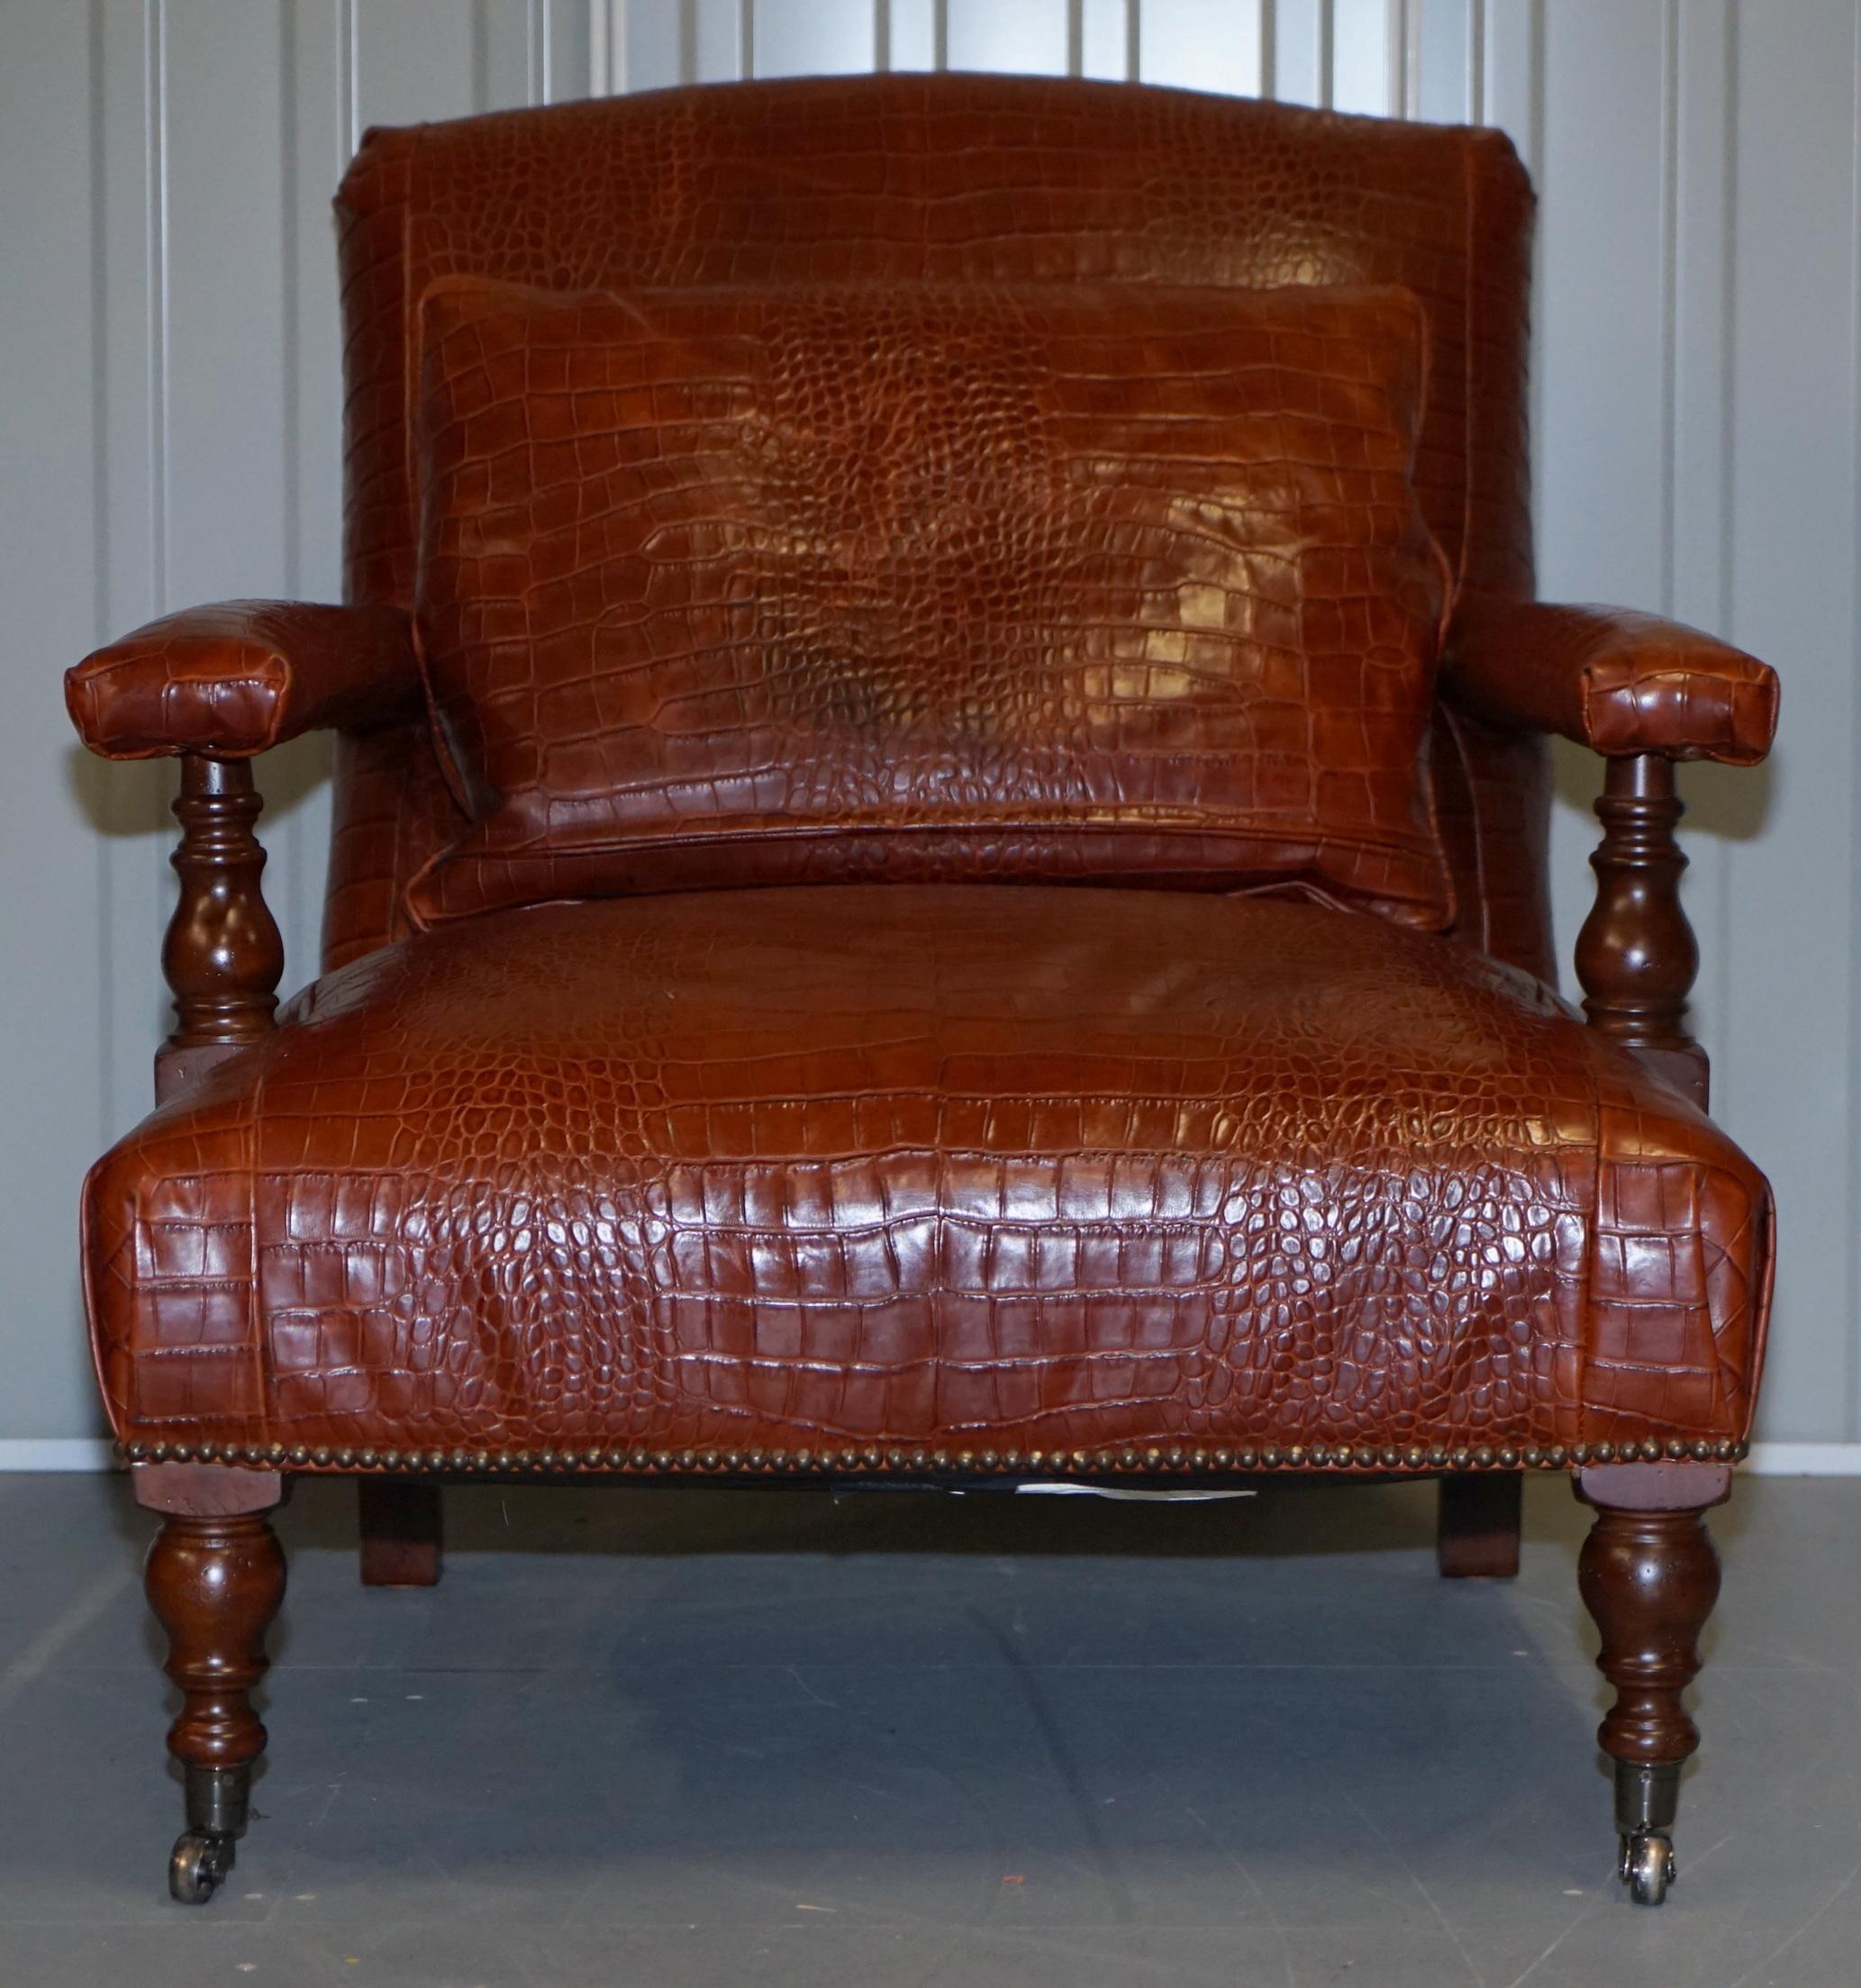 We are delighted to offer for sale this stunning original heritage brown Crocodile / Alligator patina leather Ralph Lauren Library reading armchair RRP £7000

A very good looking well made and comfortable armchair, the leather is a glorious rich